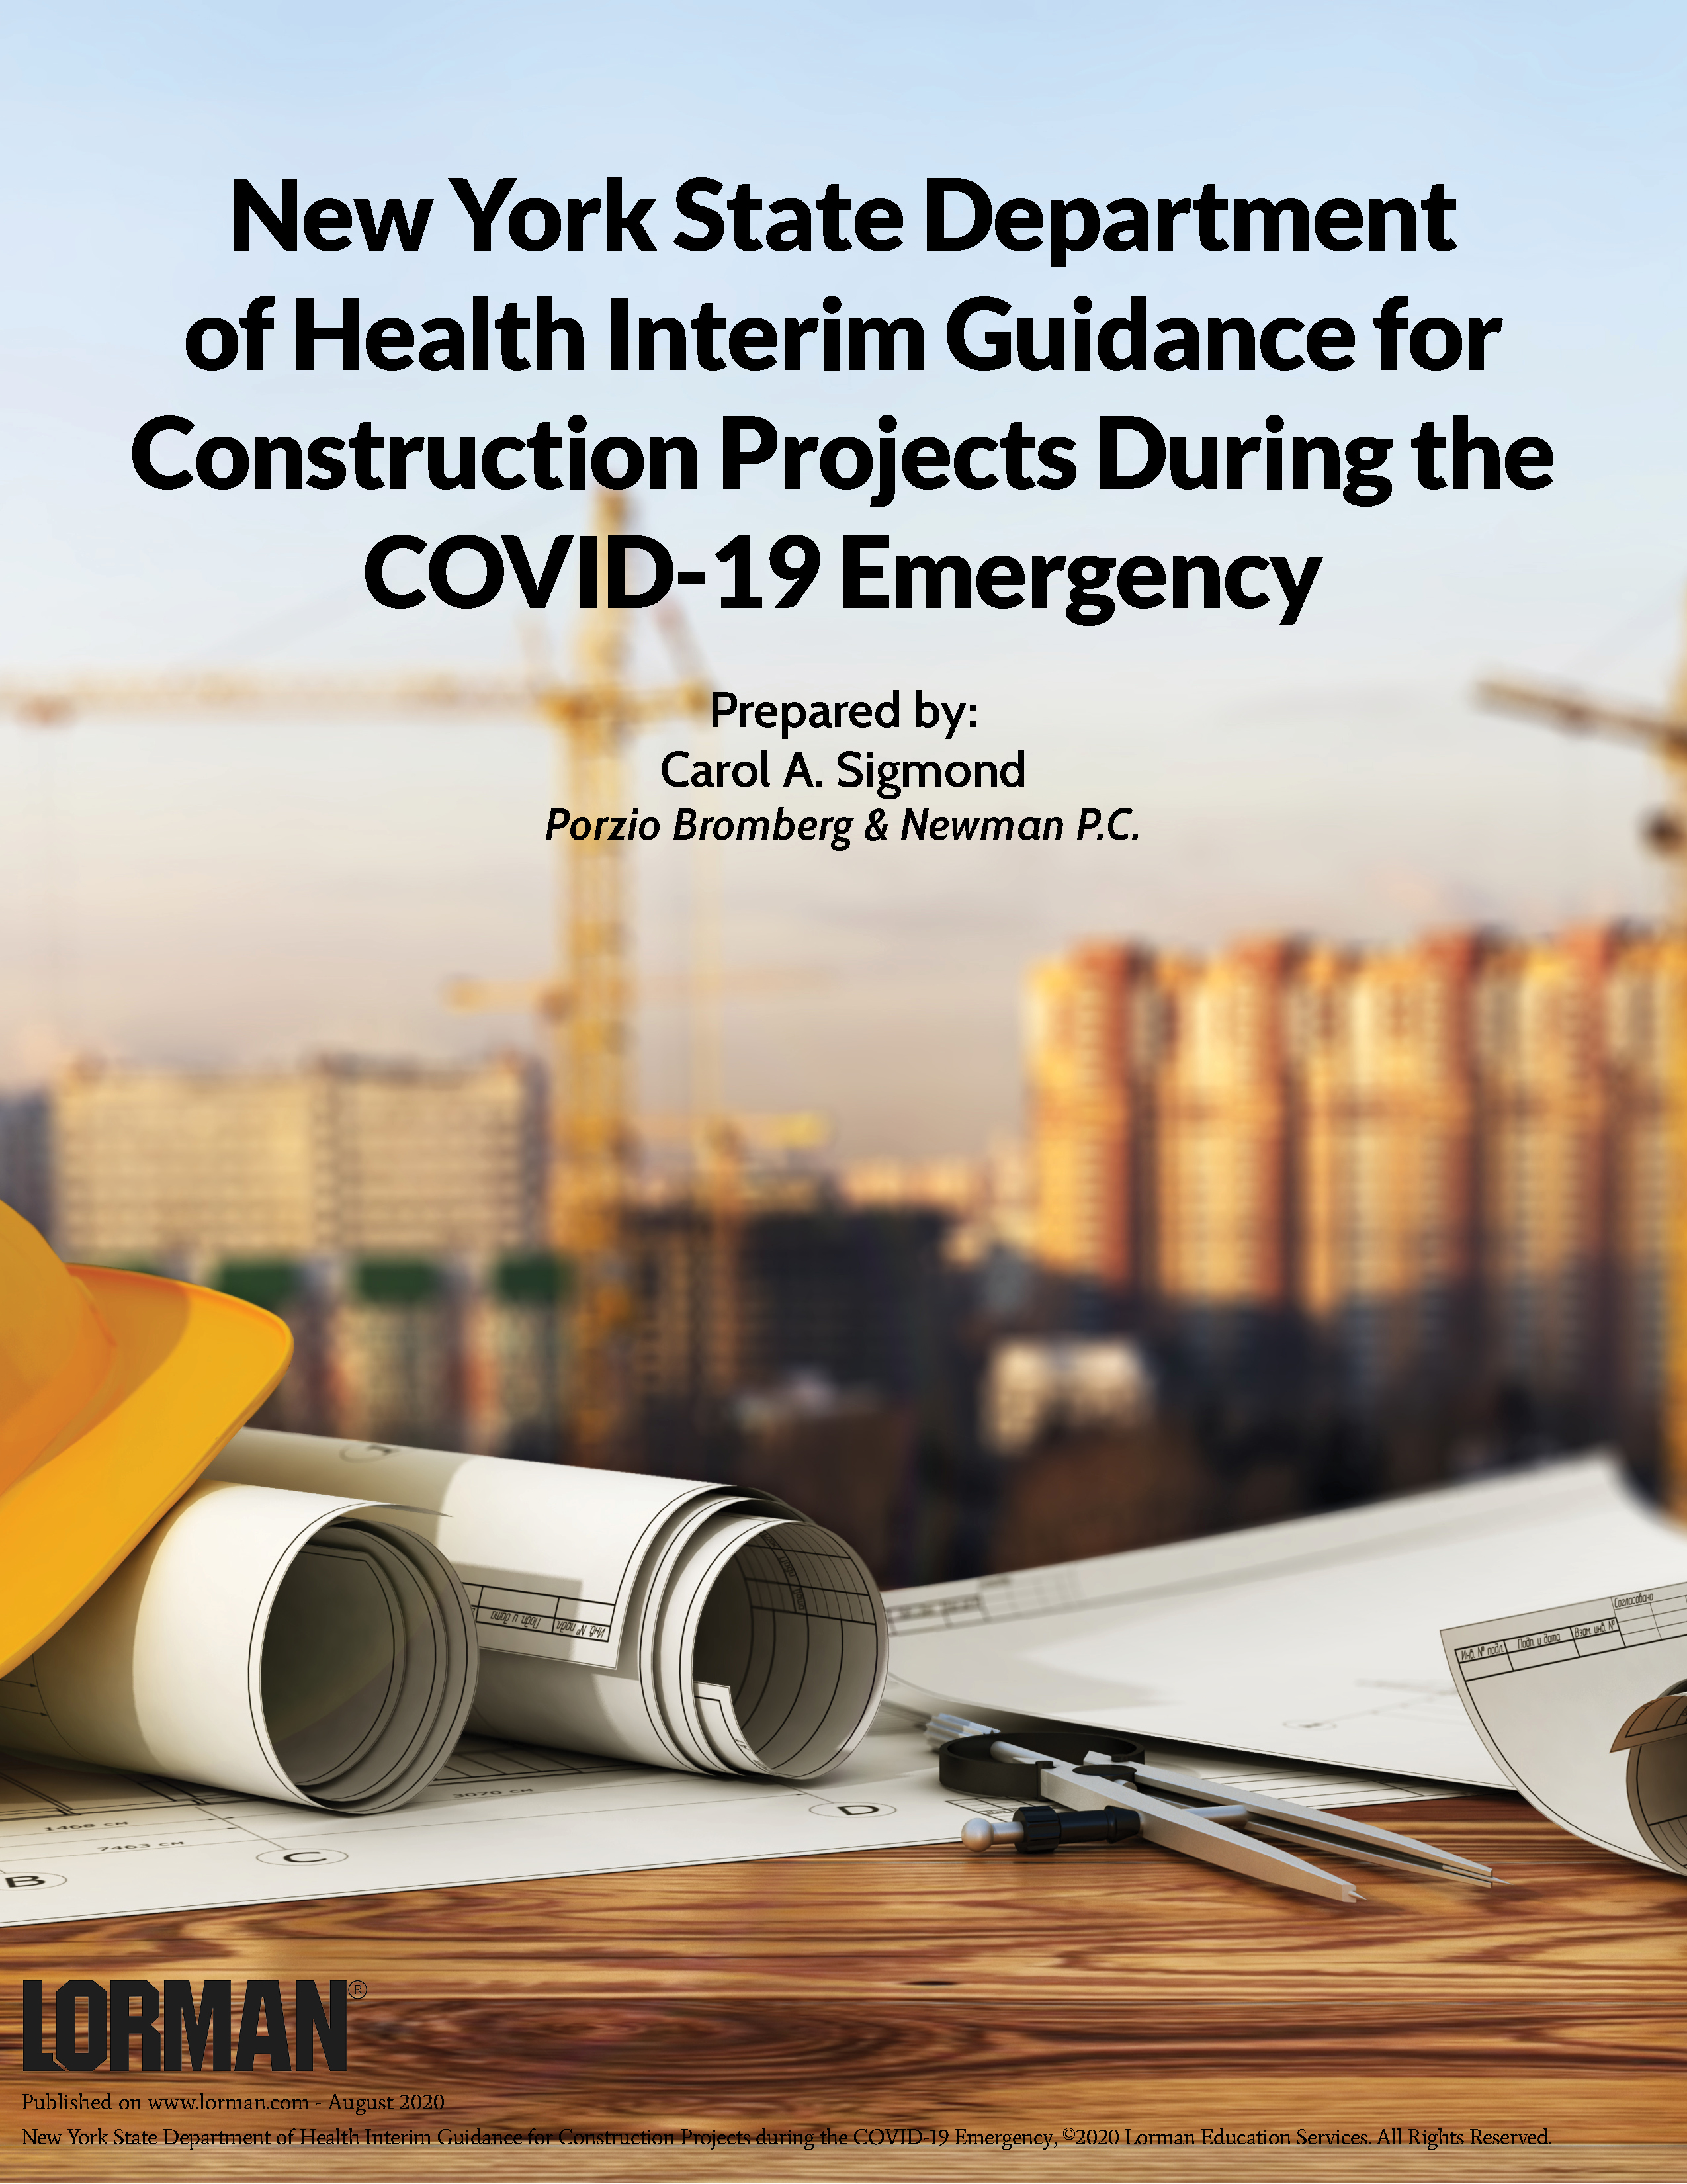 New York State DOH Interim Guidance for Construction Projects During the COVID-19 Emergency